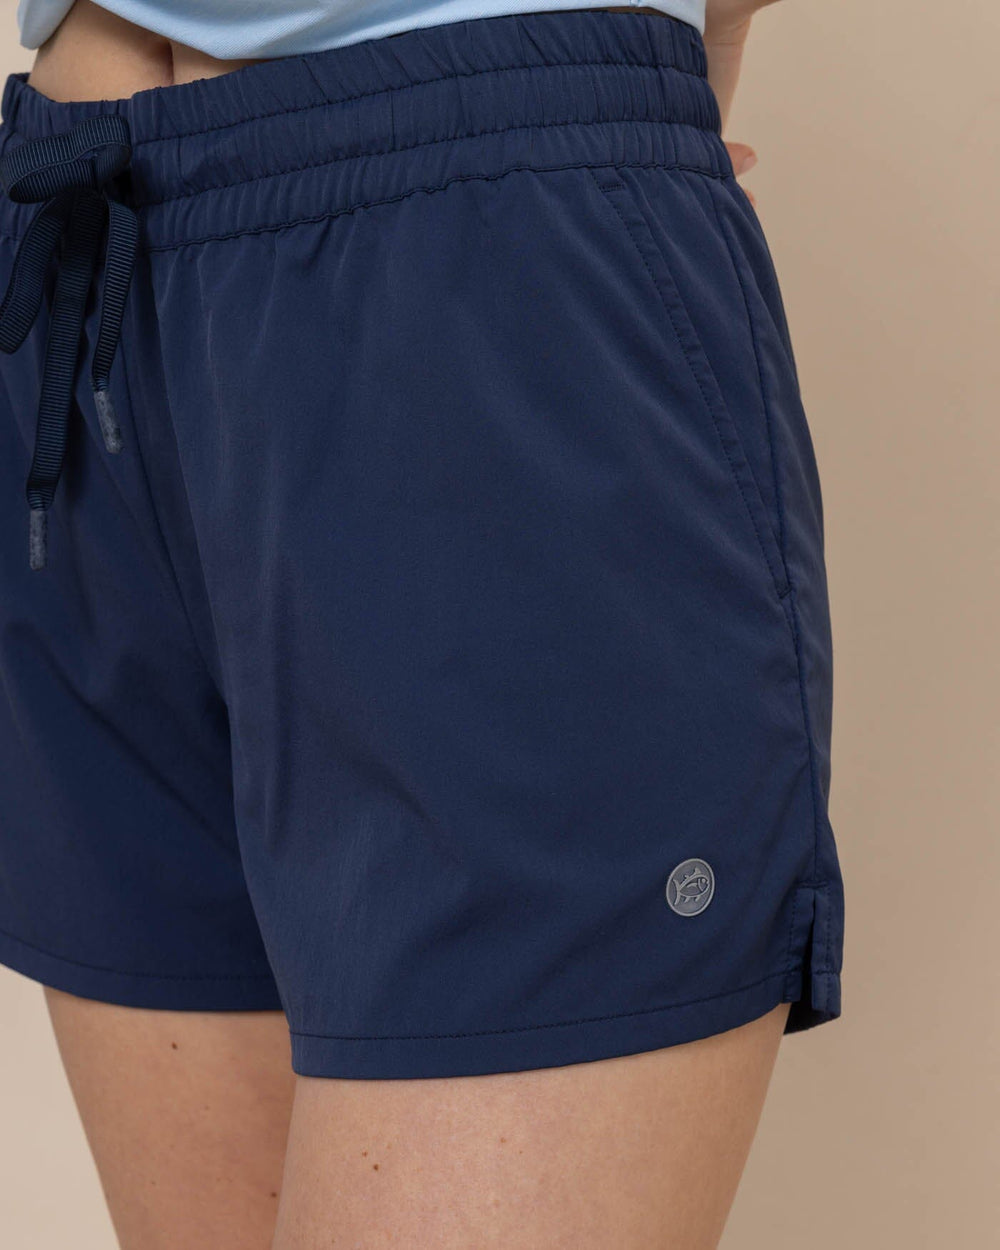 The detail view of the Southern Tide Sammie Intercoastal Performance Short by Southern Tide - Dress Blue